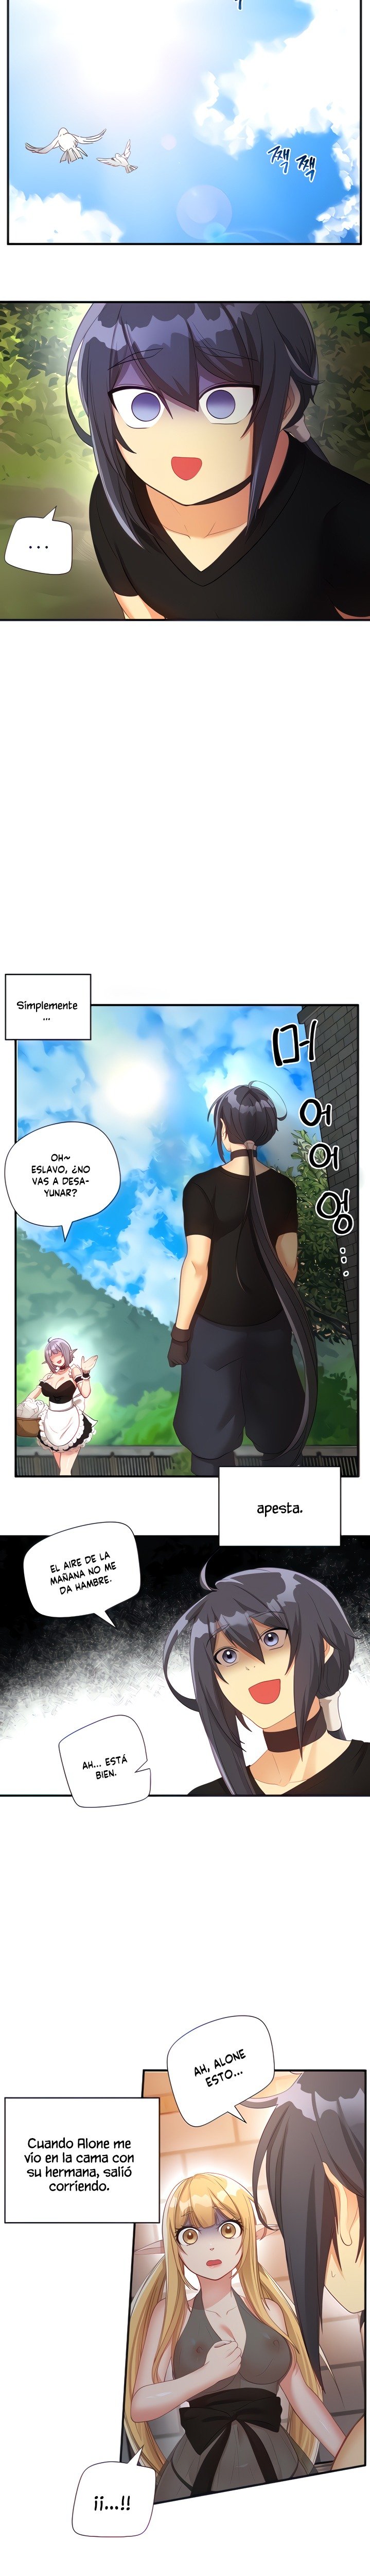 slave-knight-of-the-elf-raw-chap-37-2